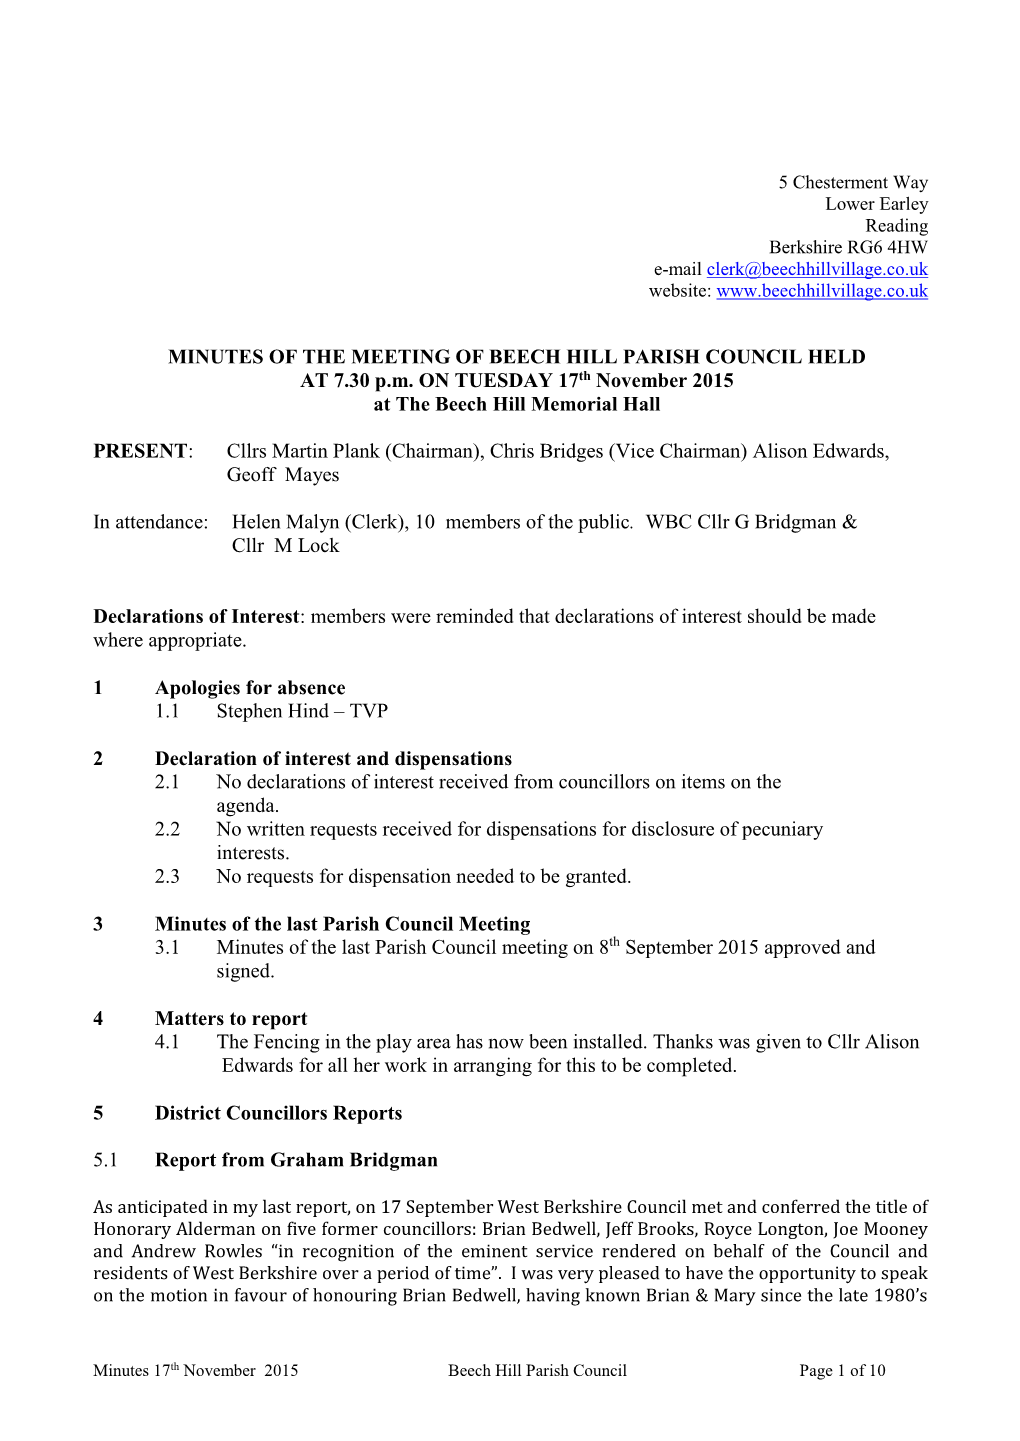 MINUTES of the MEETING of BEECH HILL PARISH COUNCIL HELD at 7.30 P.M